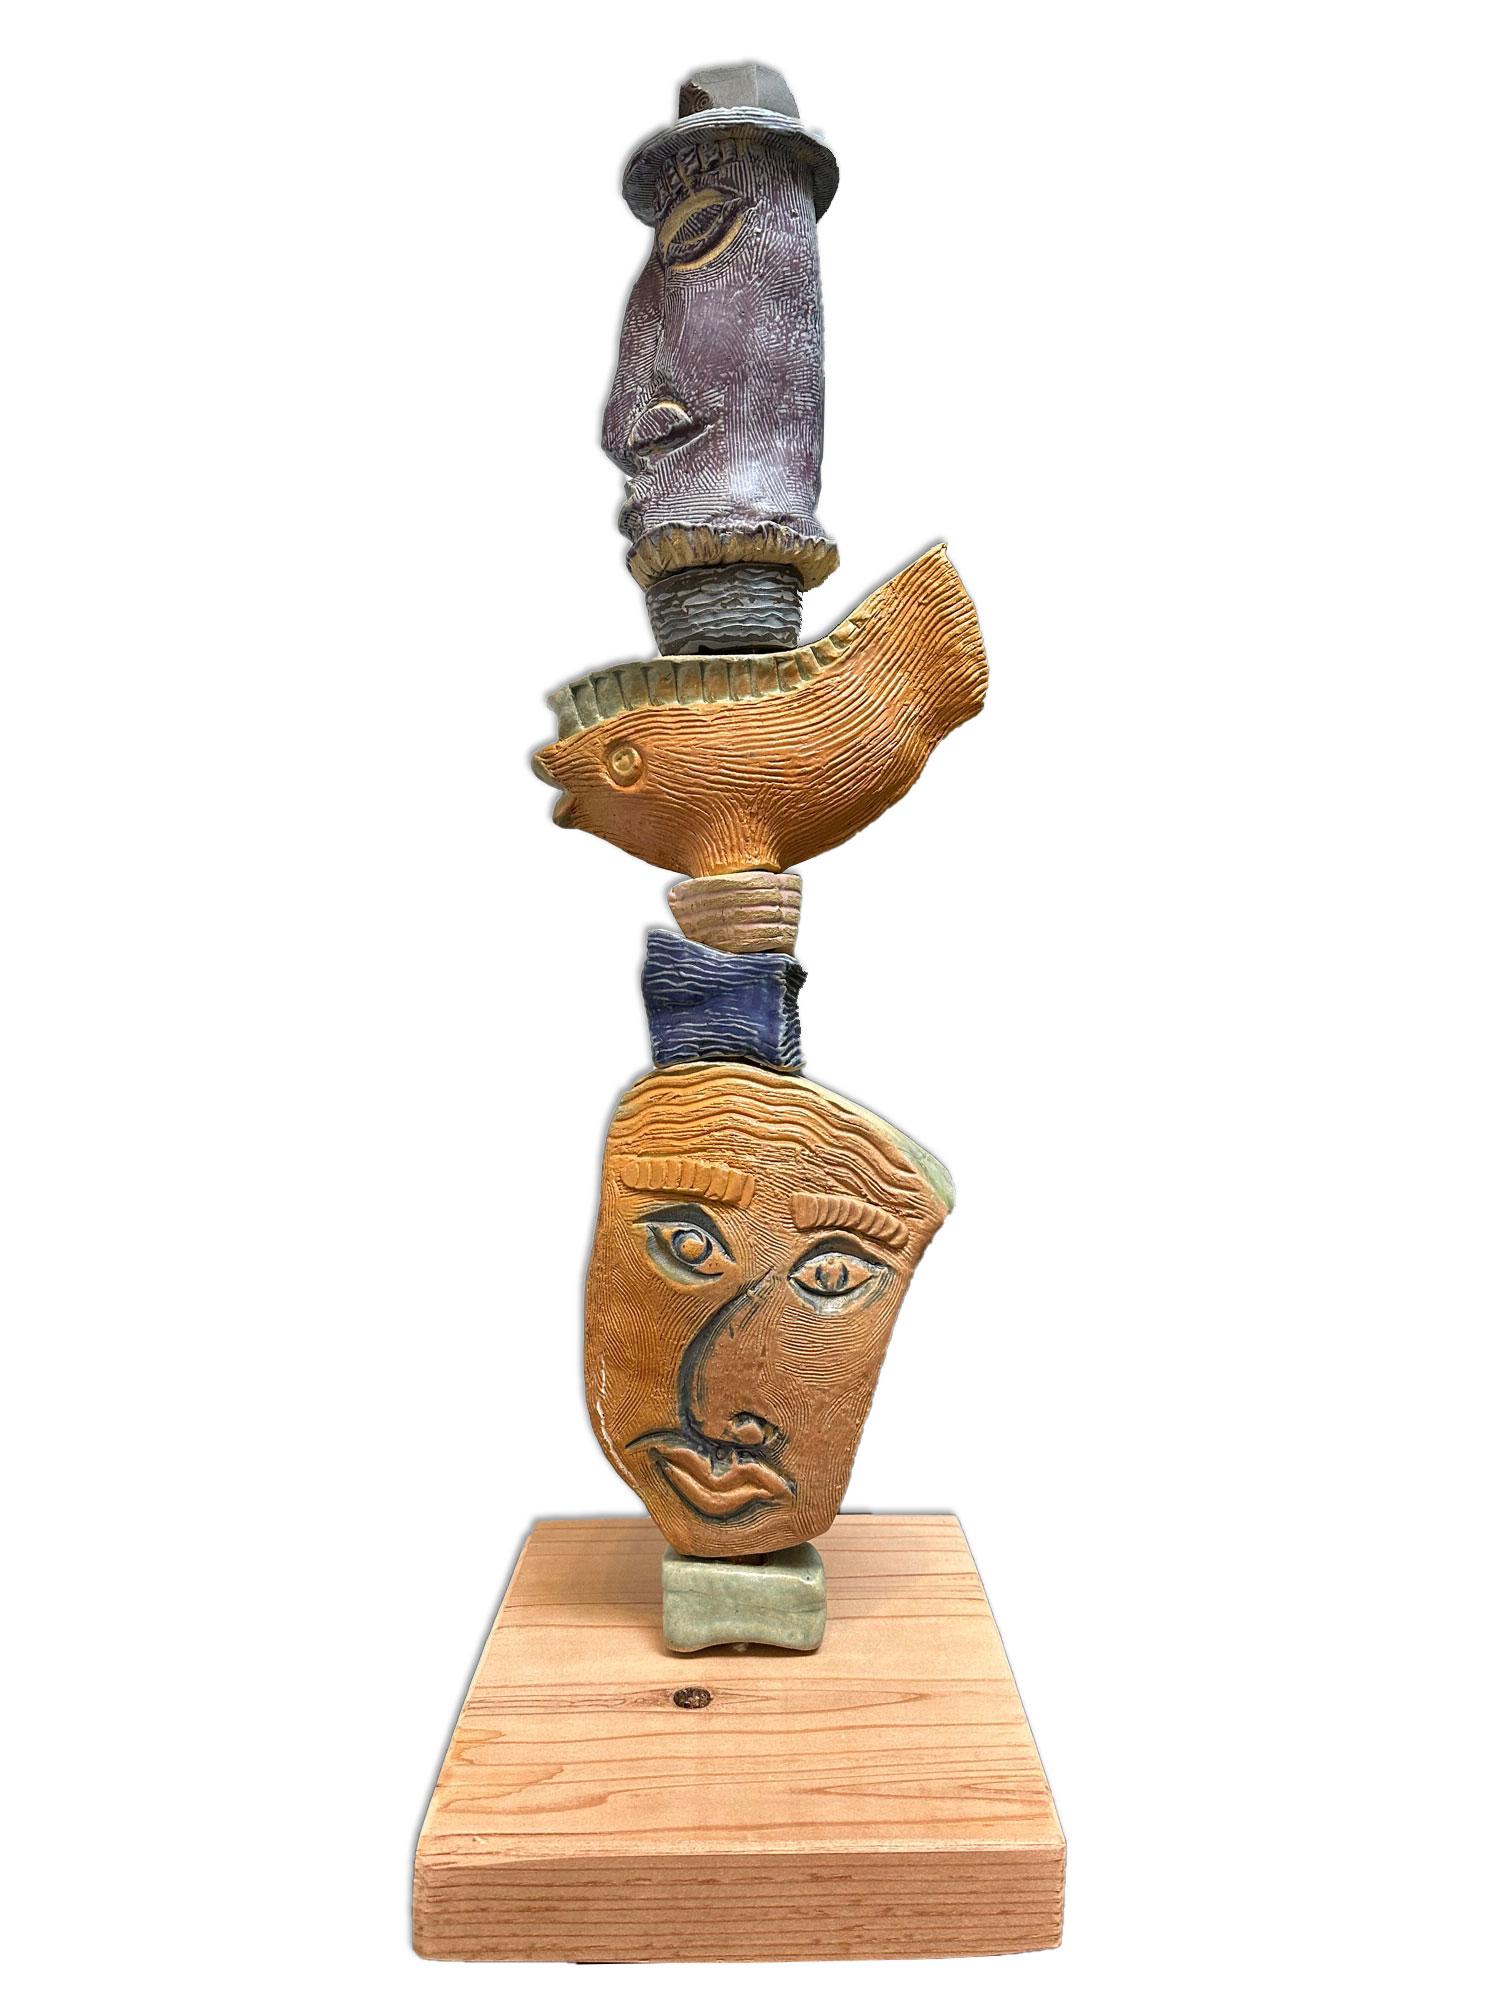 Oceanic Essence: Ancient Face & Fish Symbol by Marc Zimmerman - Totem Sculpture